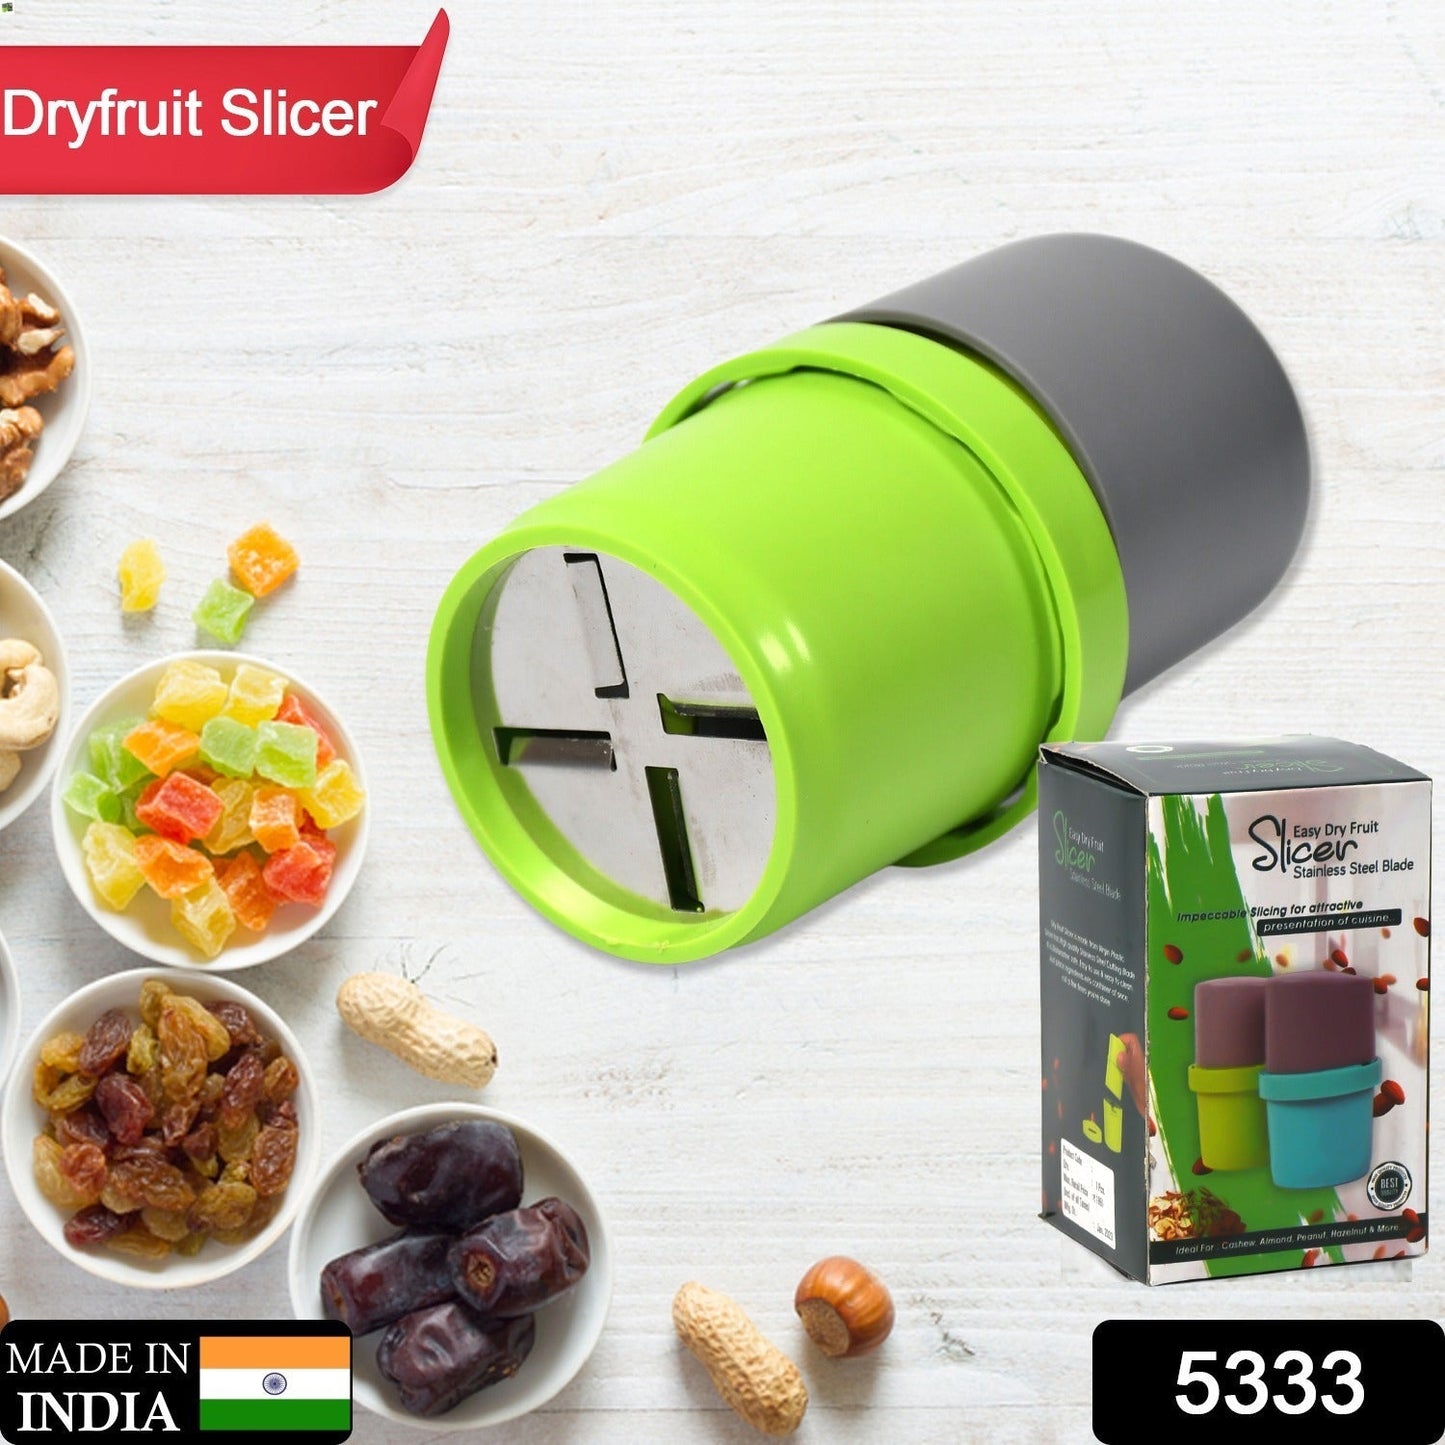 5333 Plastic Dry Fruit and Paper Mill Grinder Slicer, Chocolate Cutter and Butter Slicer with 3 in 1 Blade, Standard, Multicolor DeoDap